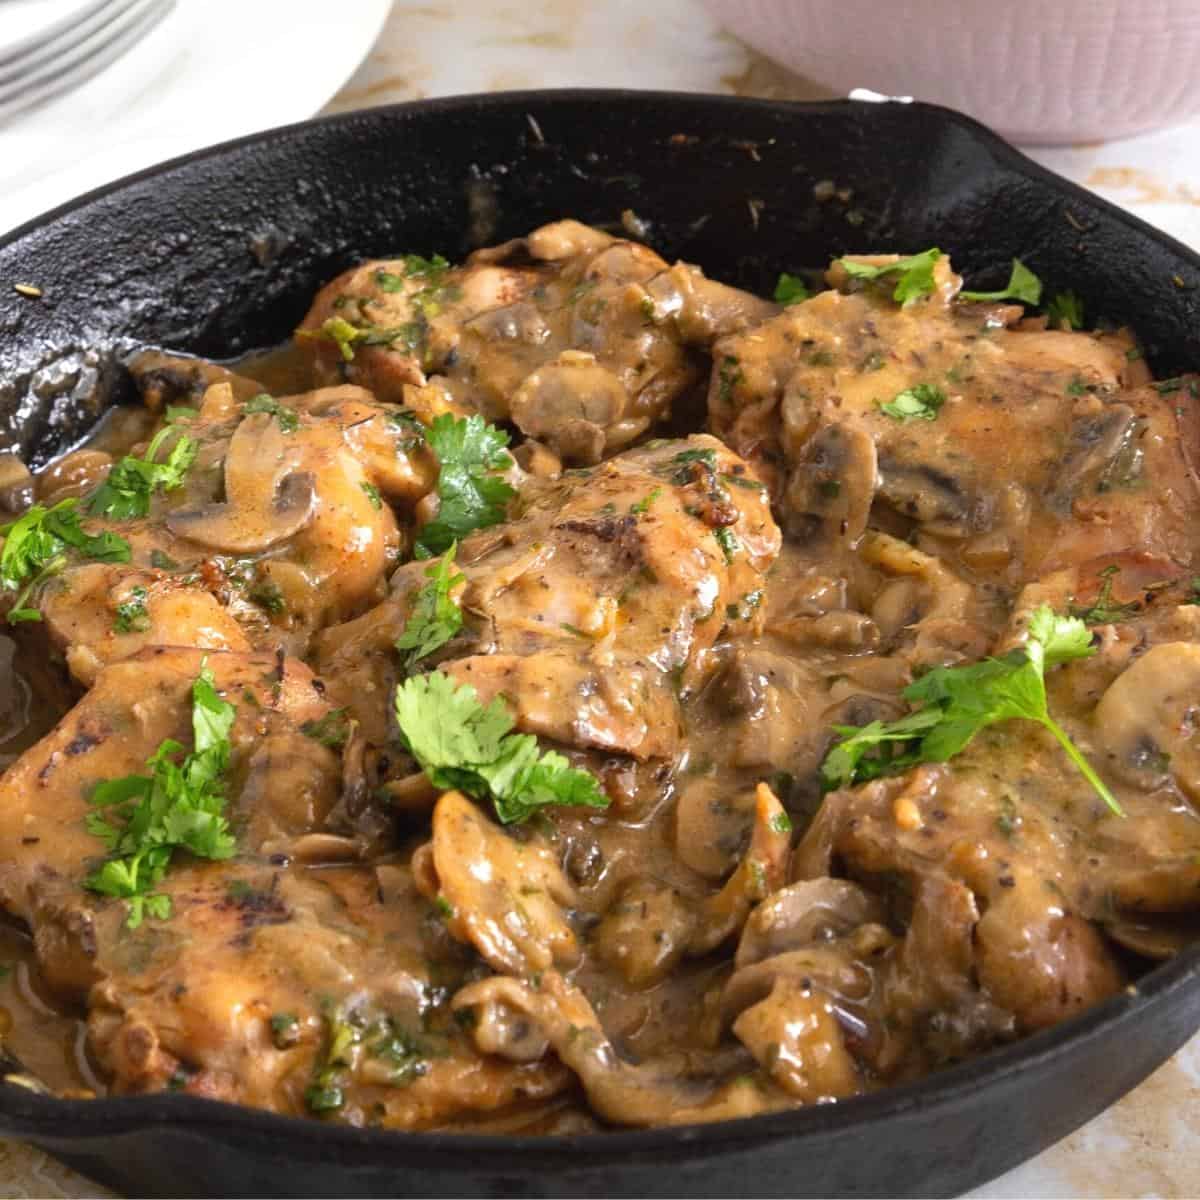 Skillet with mushrooms in sauce.